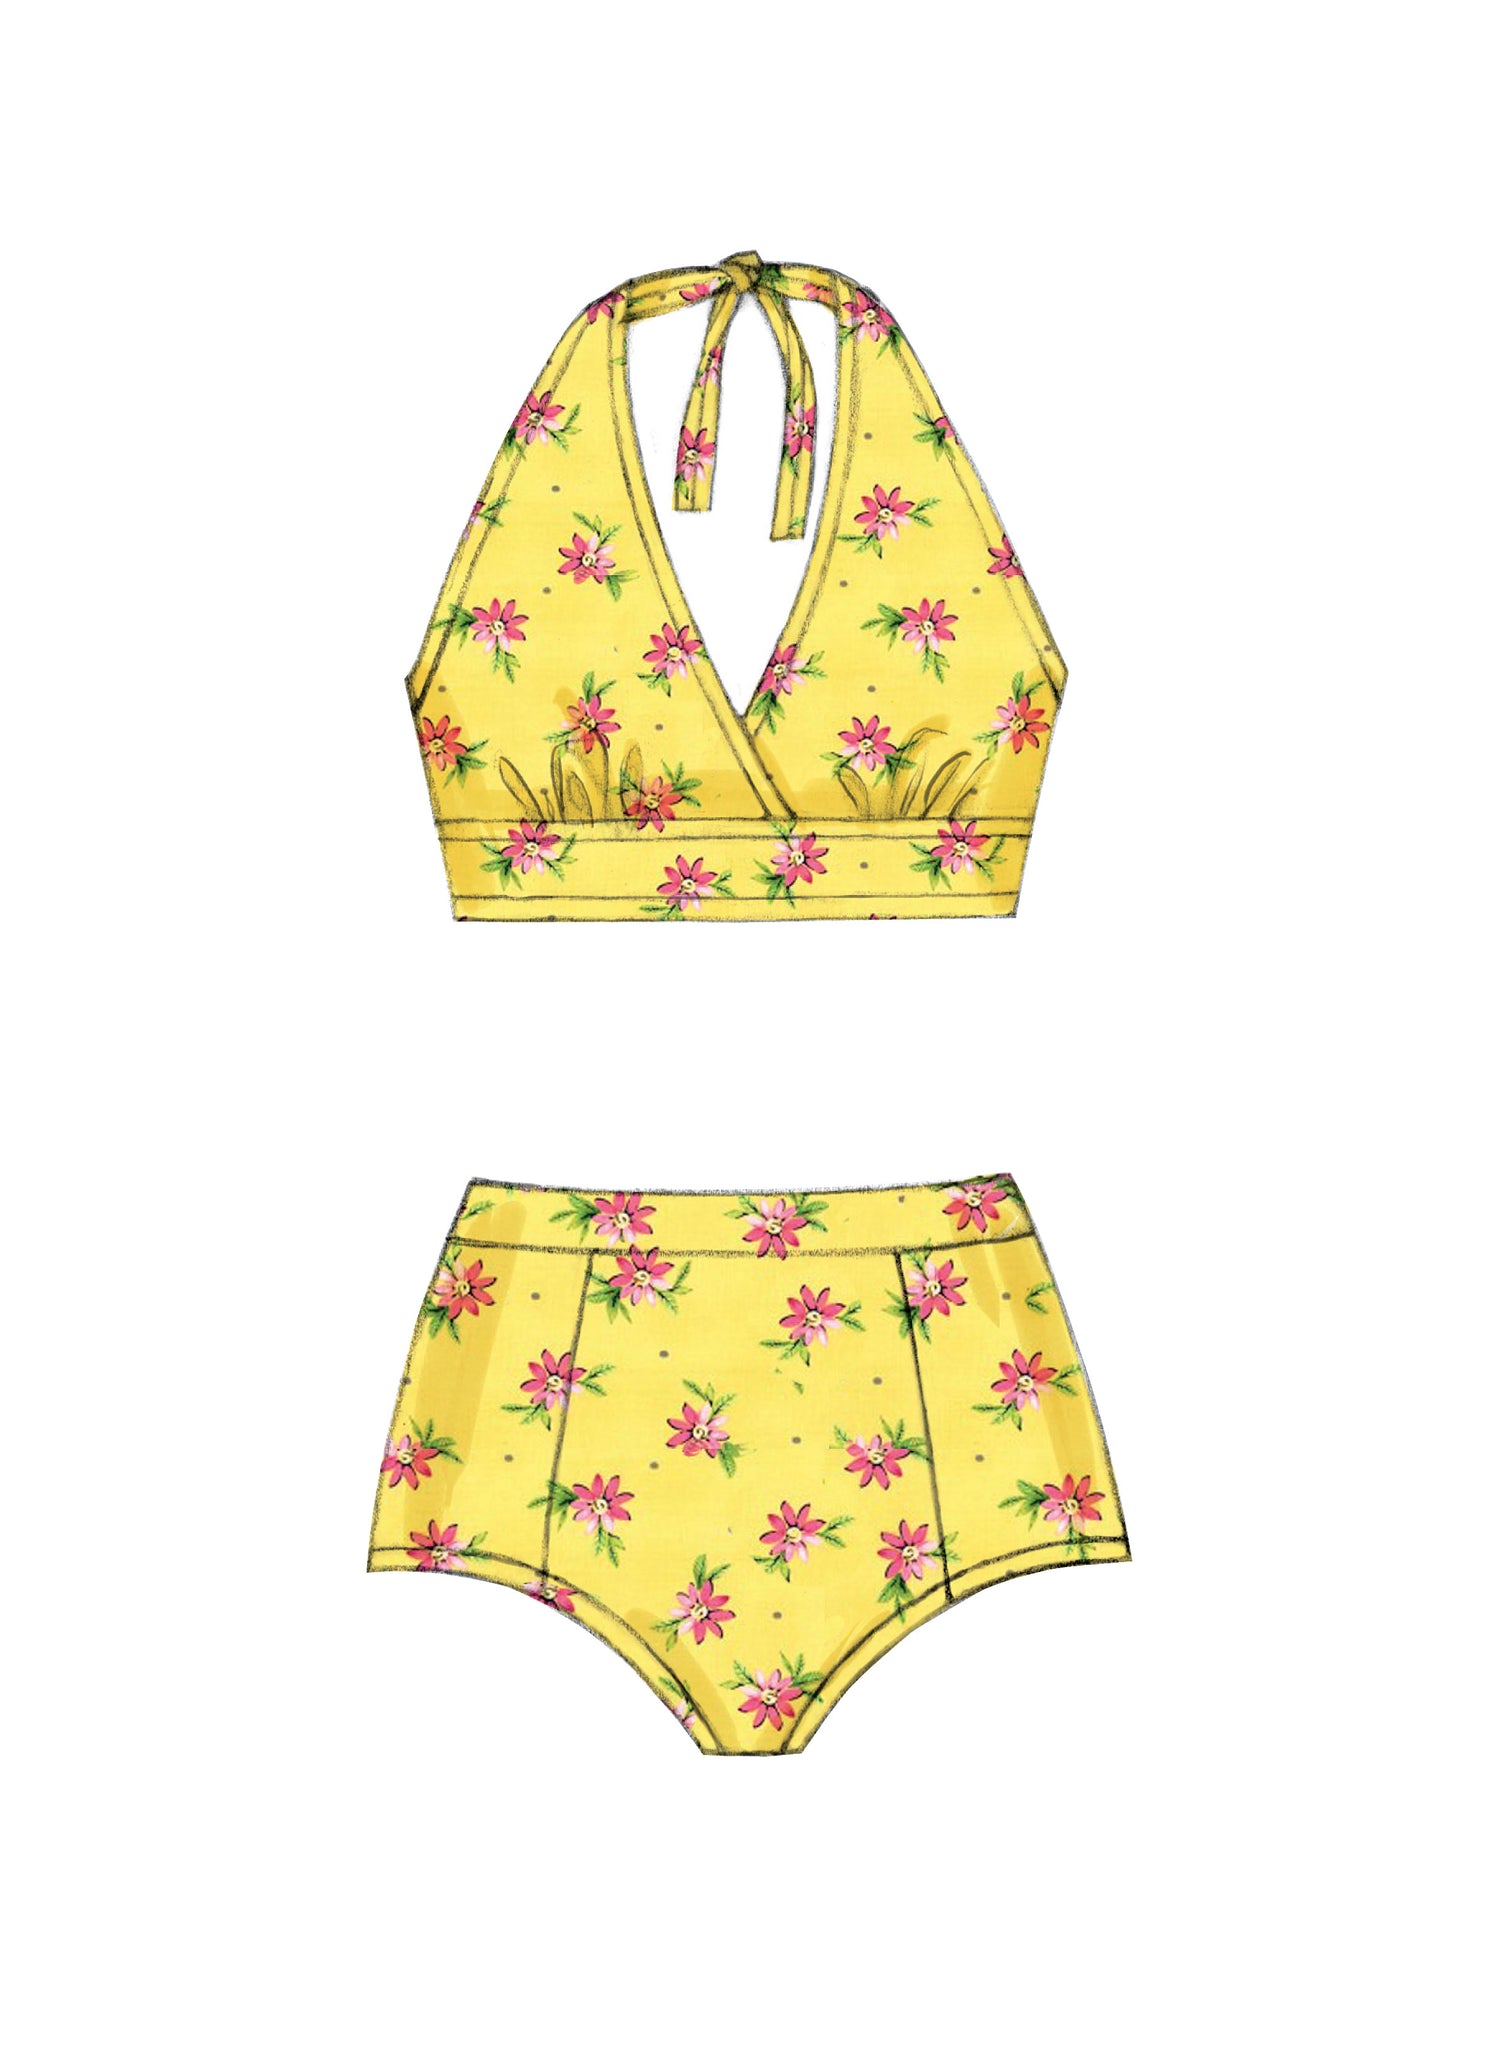 McCall's Pattern M7168 Misses' Swimsuits – Lincraft